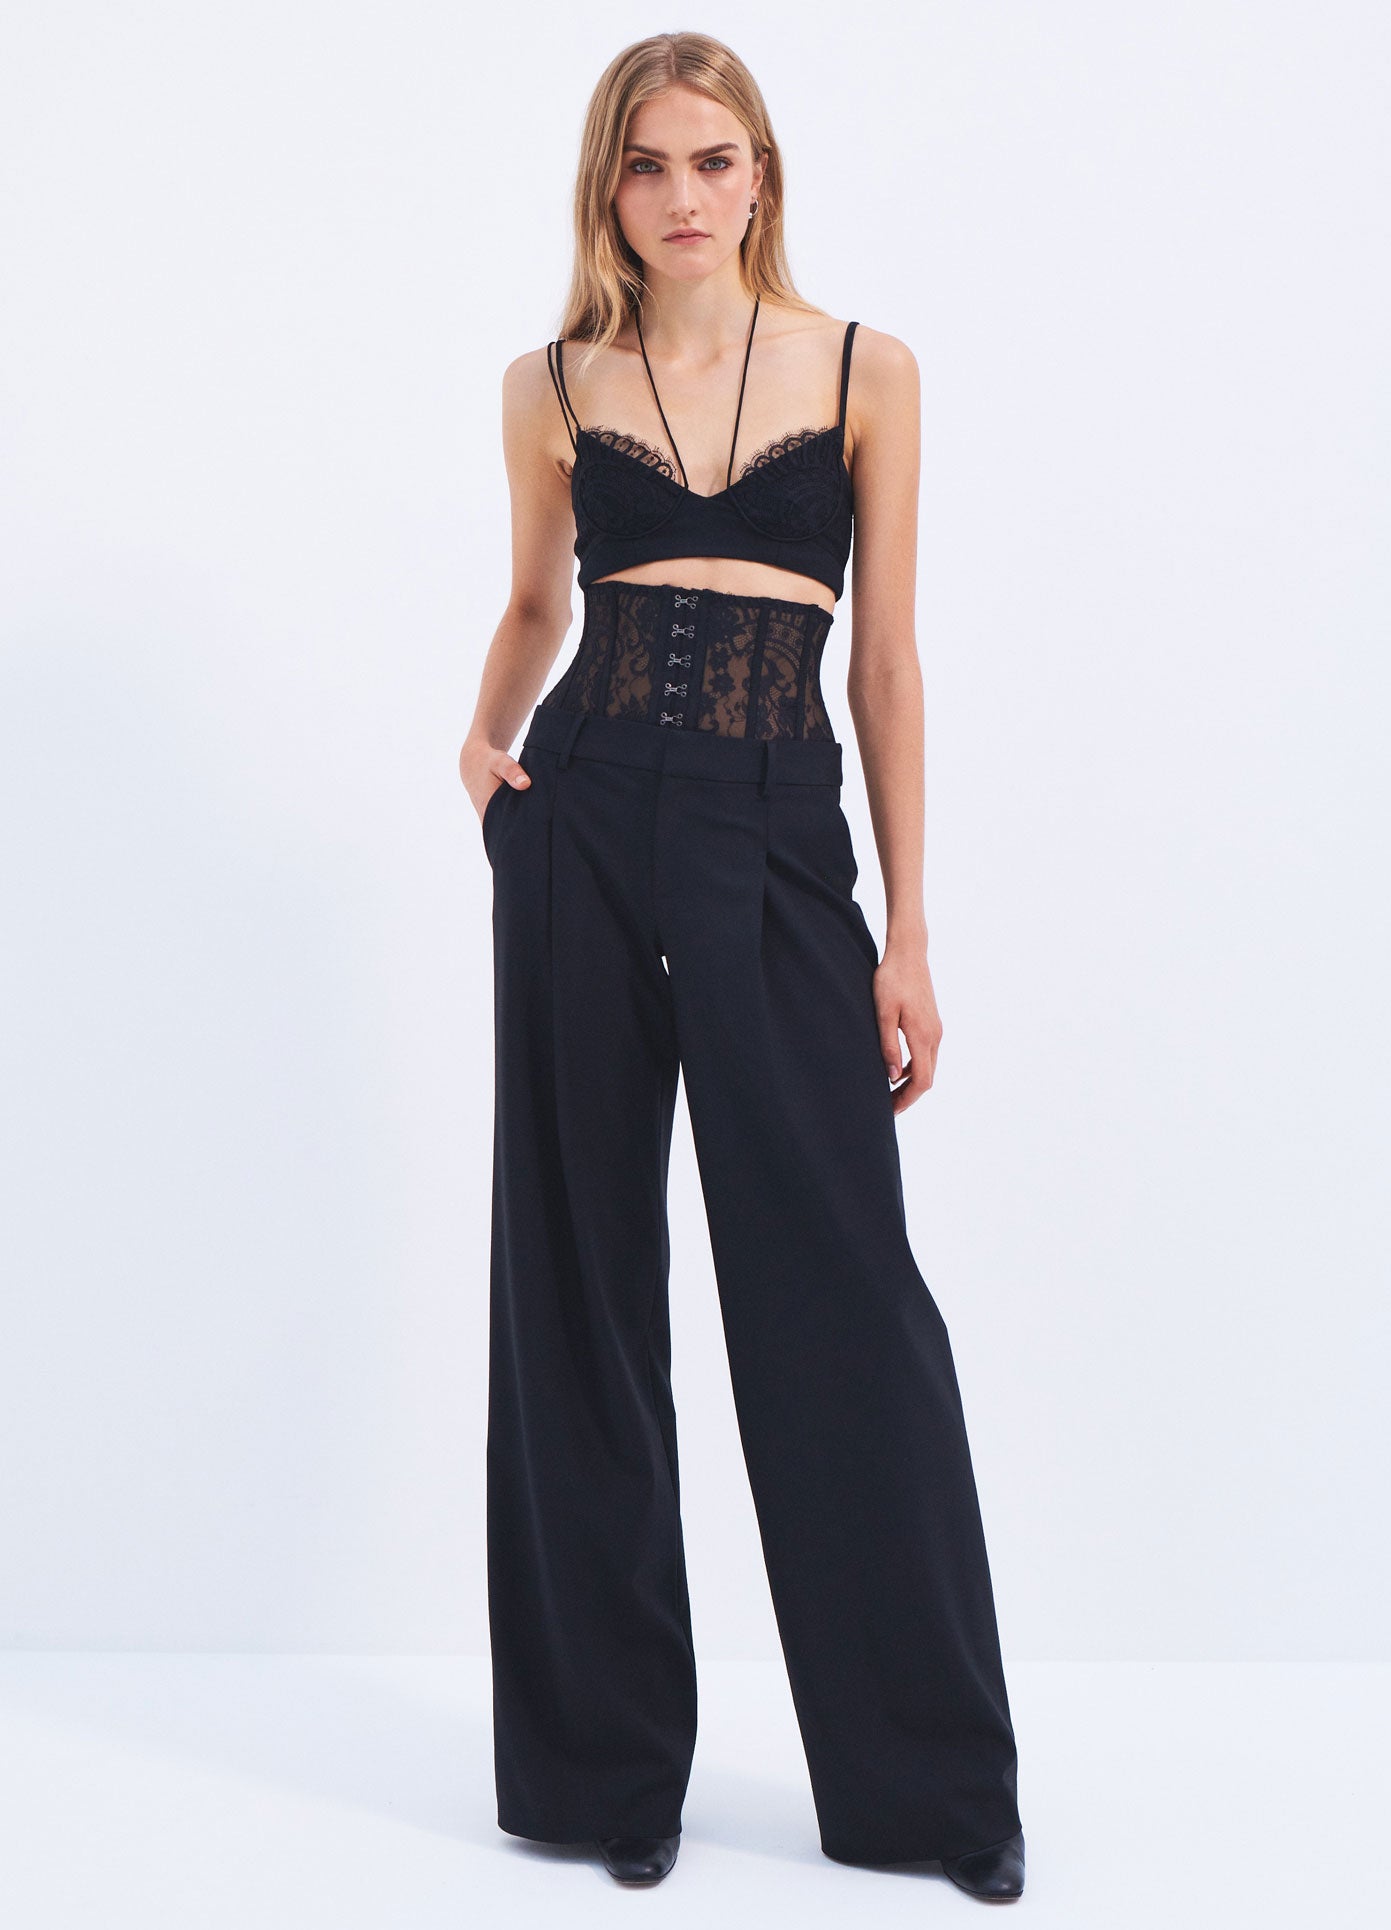 MONSE Spring 2024 Lace Bustier Trousers in Black on model full front view